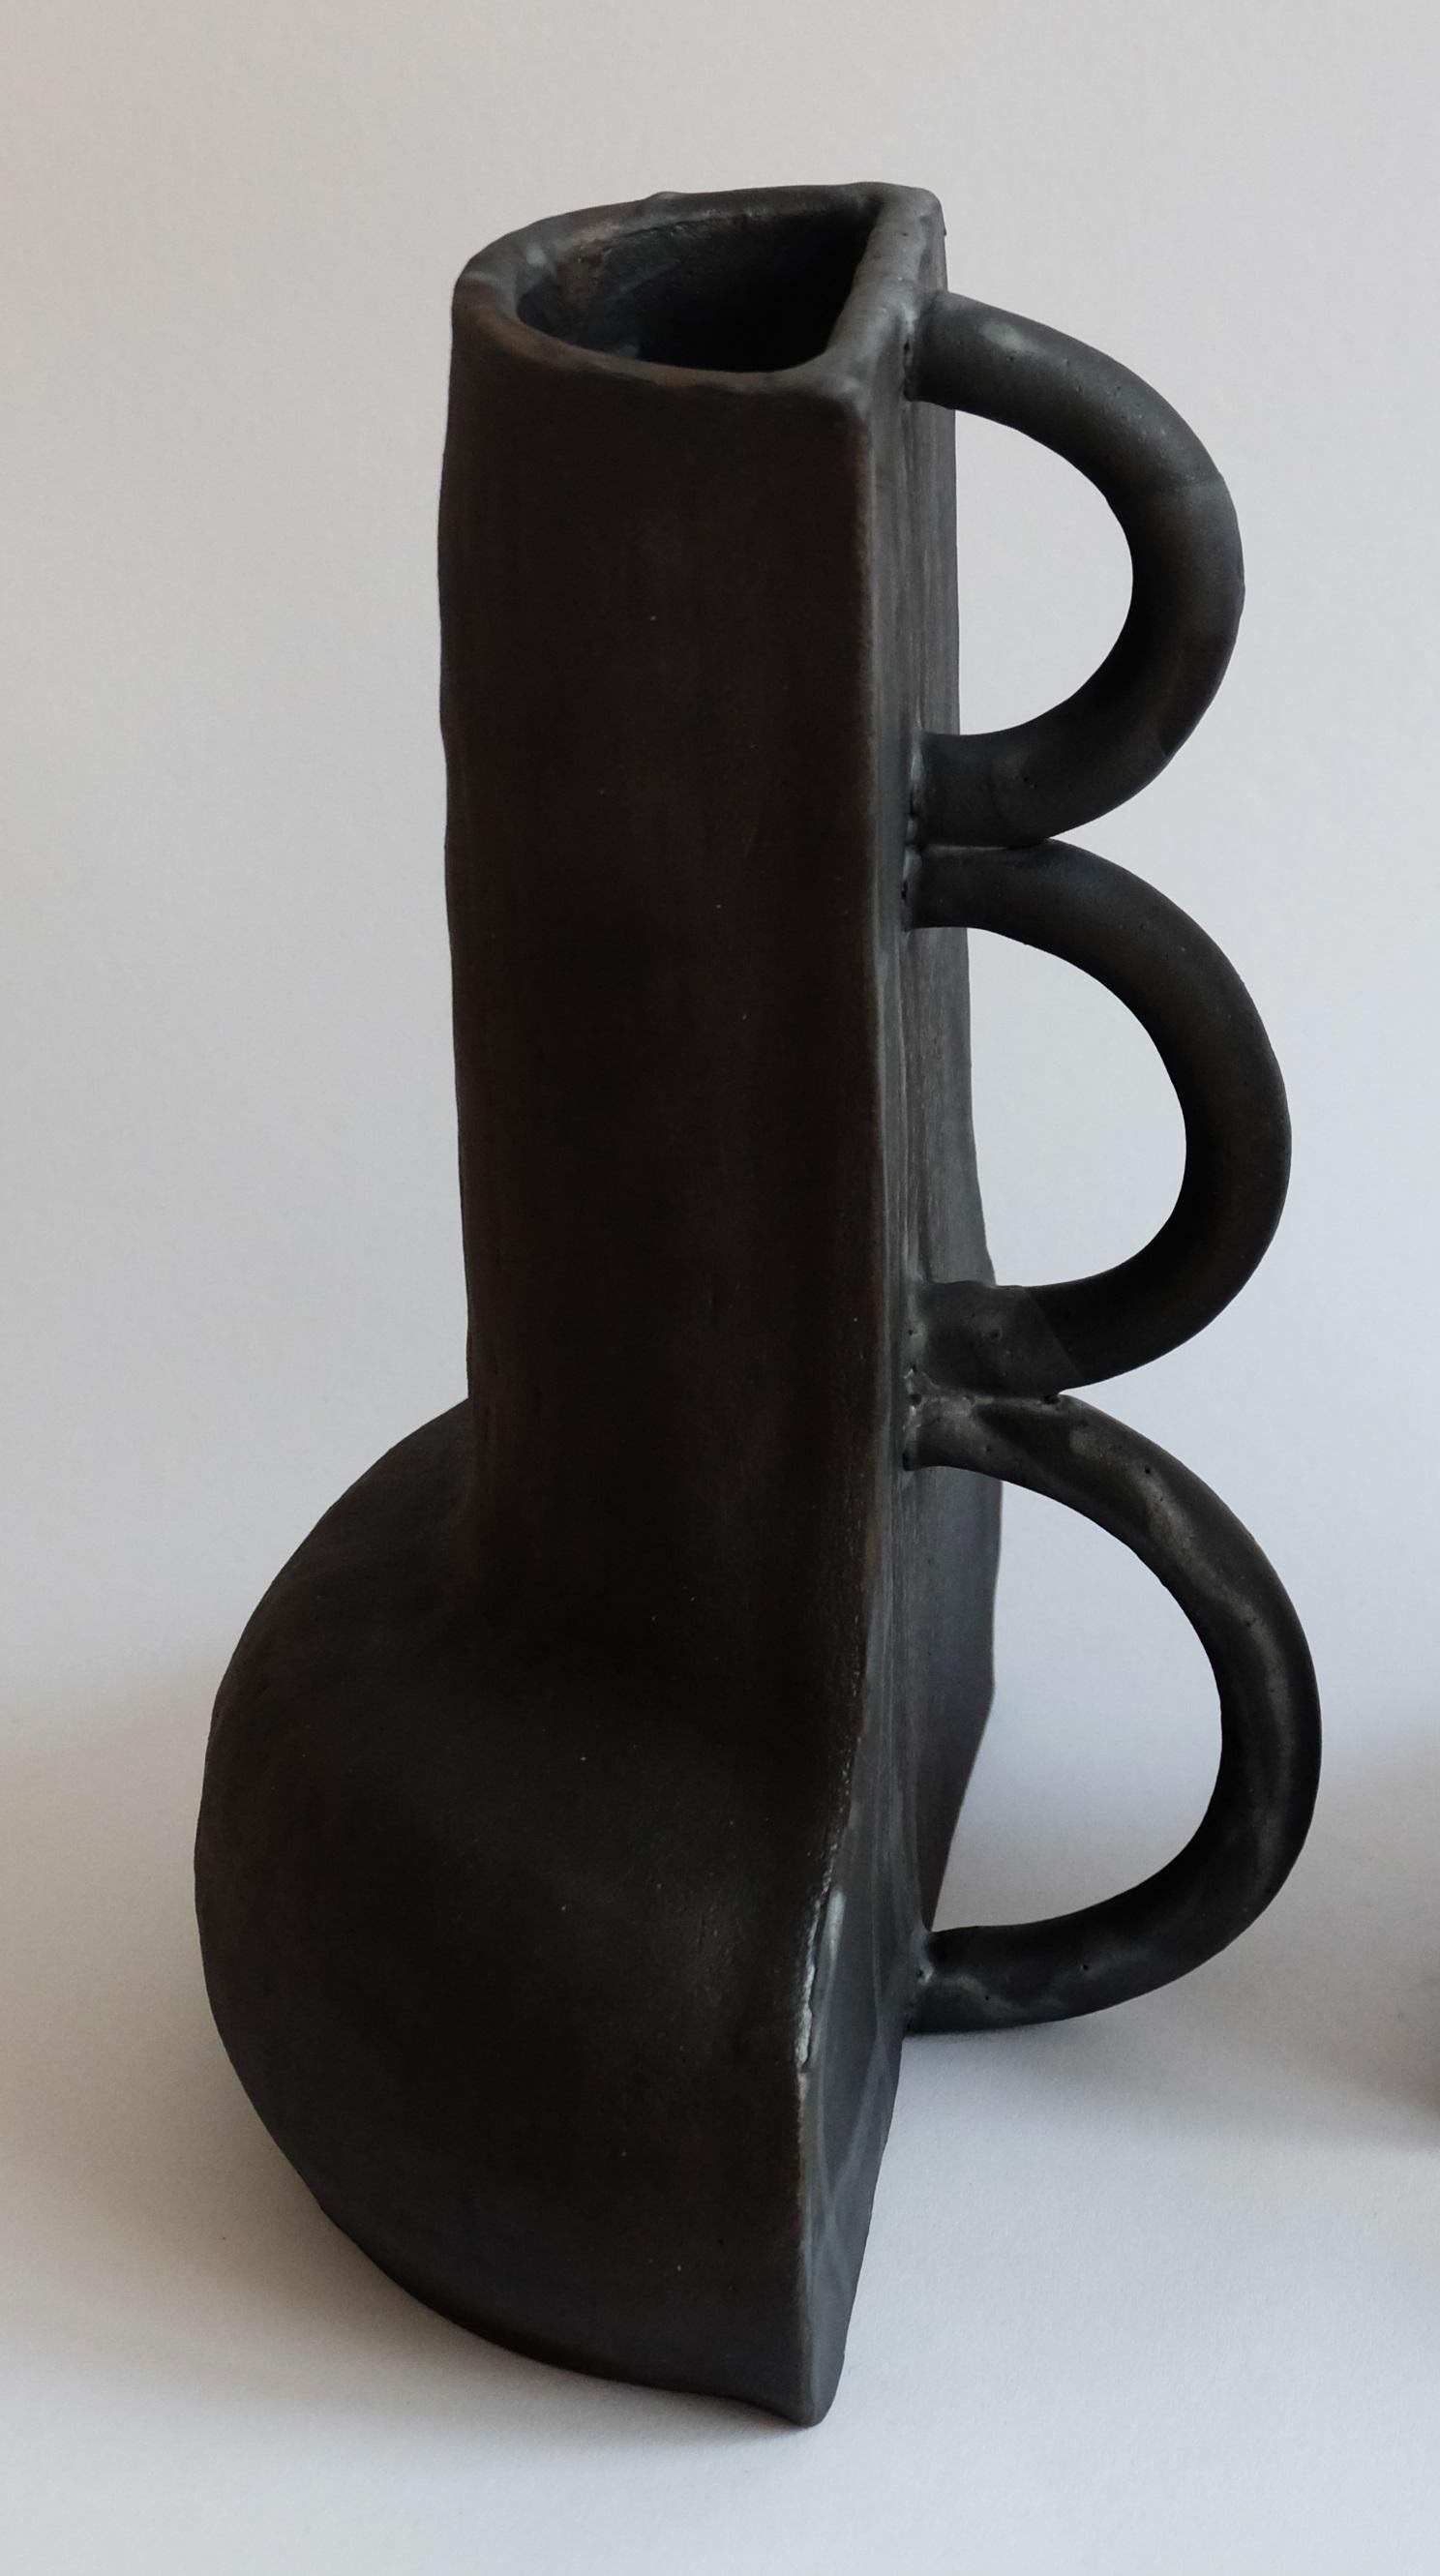 Sculptural fragment vase by Ia Kutateladze
Dimensions: W 20 x H 30 cm
Materials: Raw black clay

Fragment 01 vase is a sculptural, functional object hand-built from black clay. The contrasting sides- organic shape on one side and playful